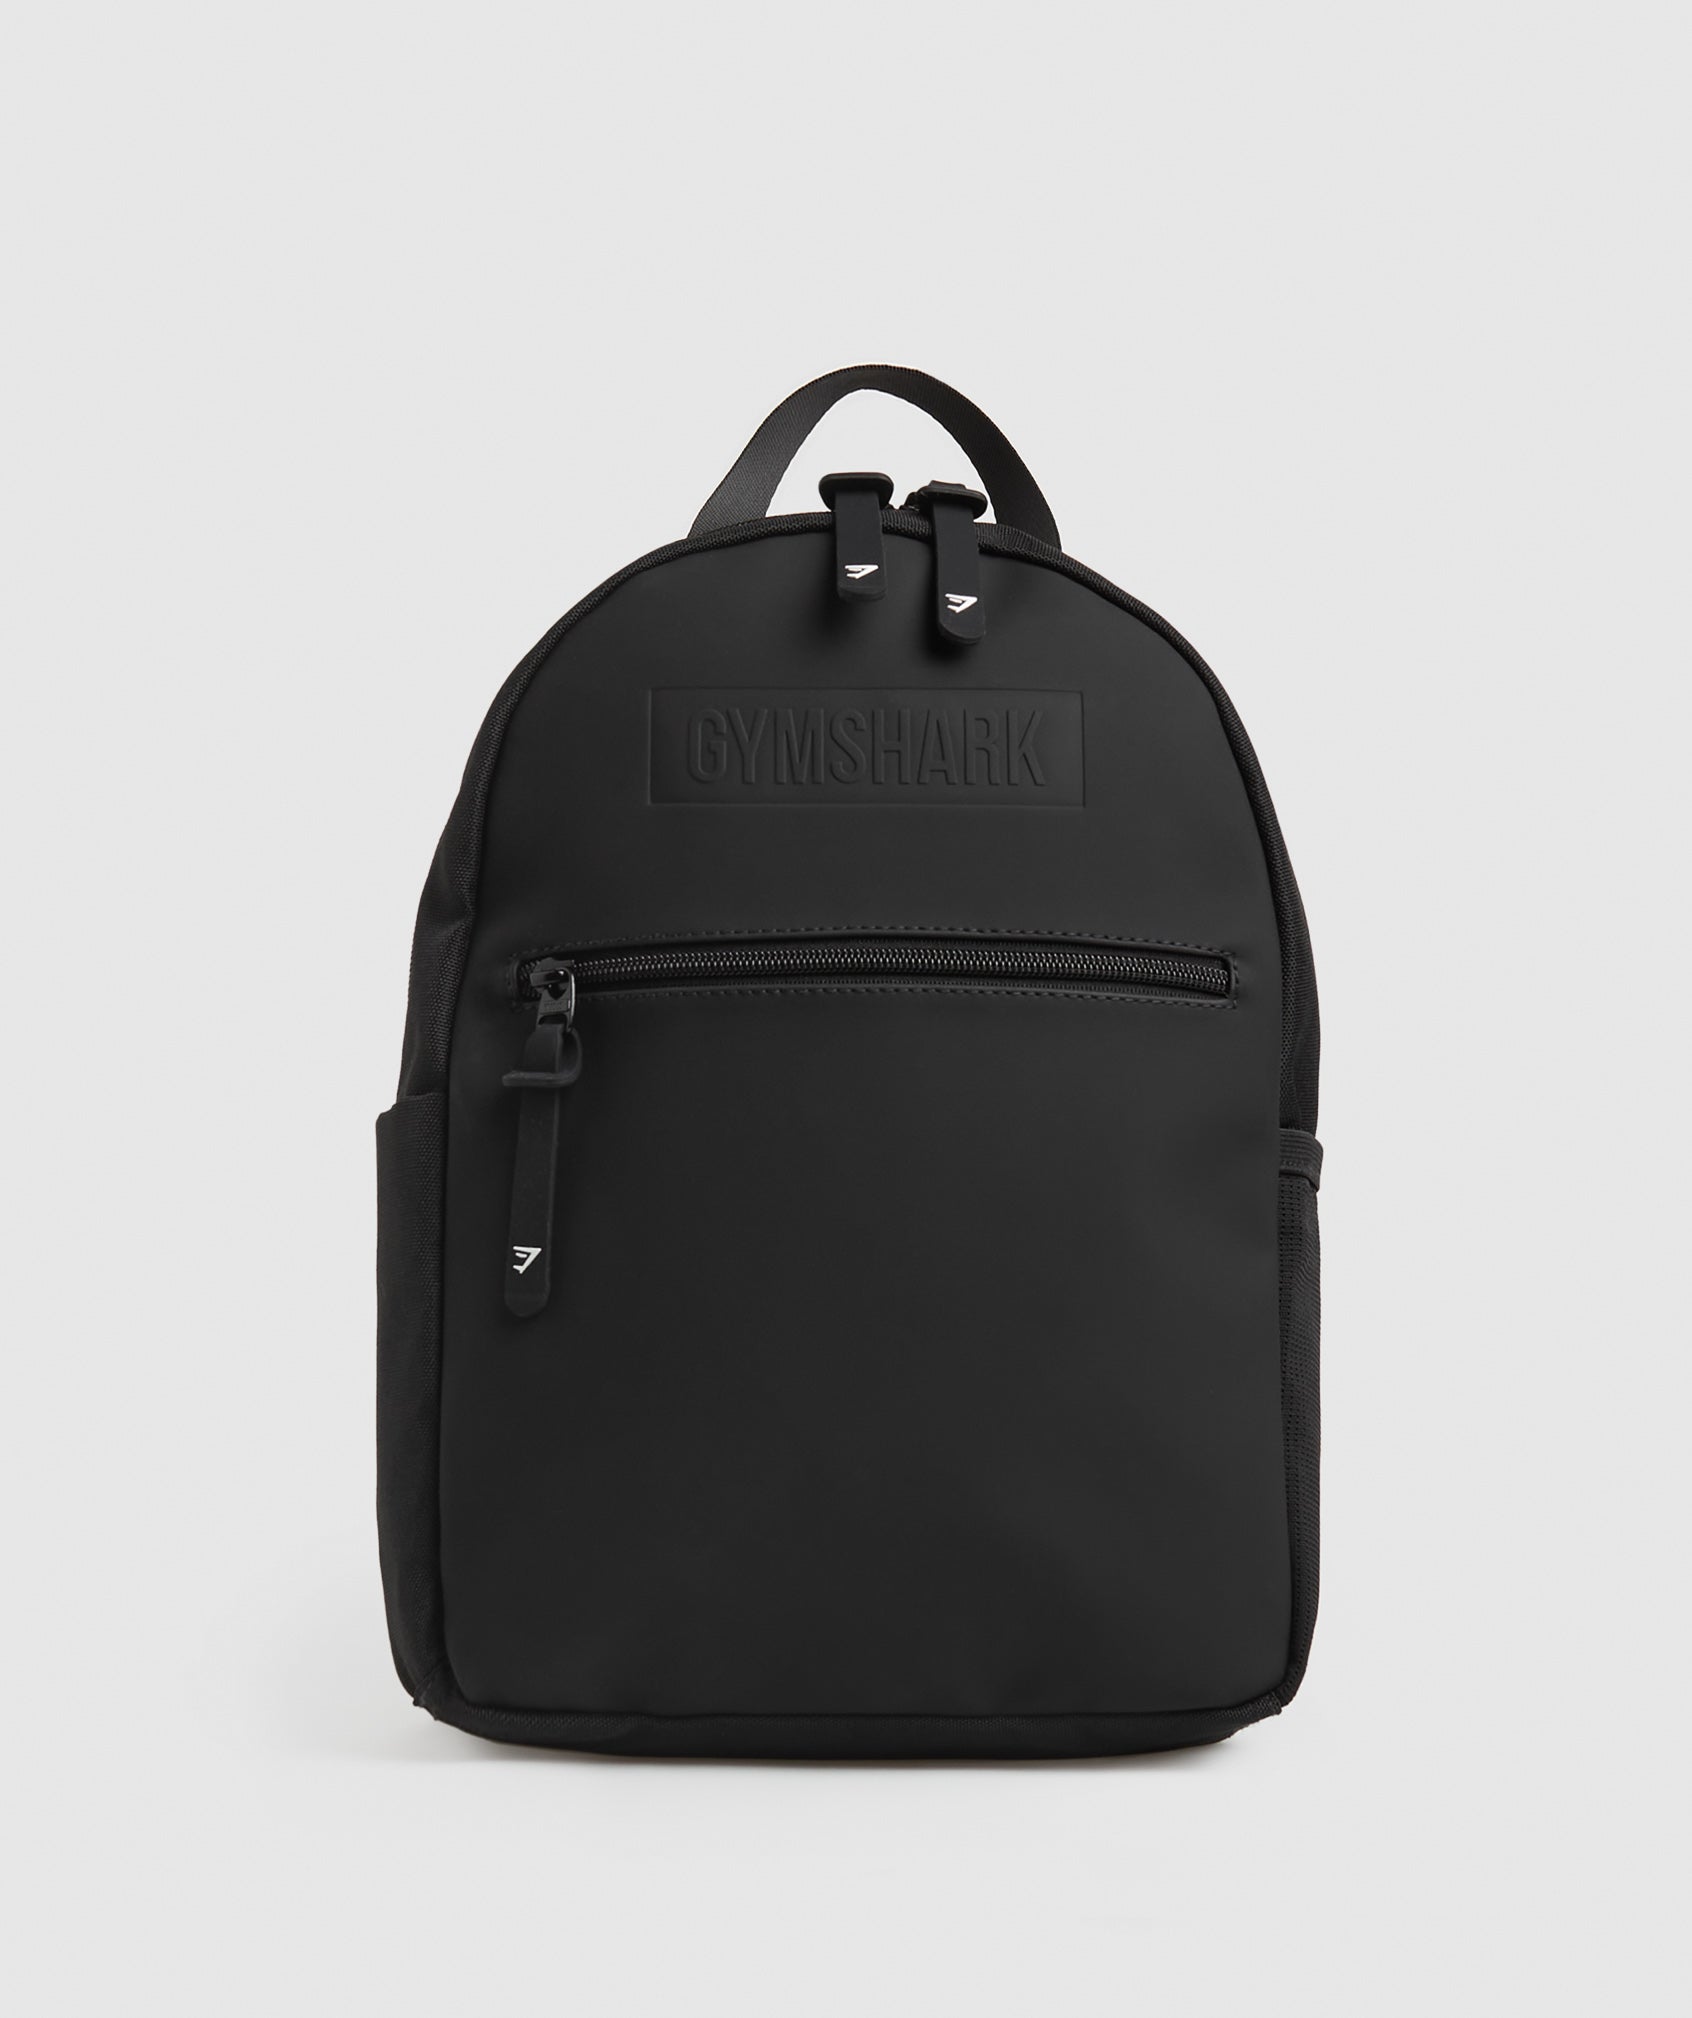 Everyday Mini Backpack in Black is out of stock